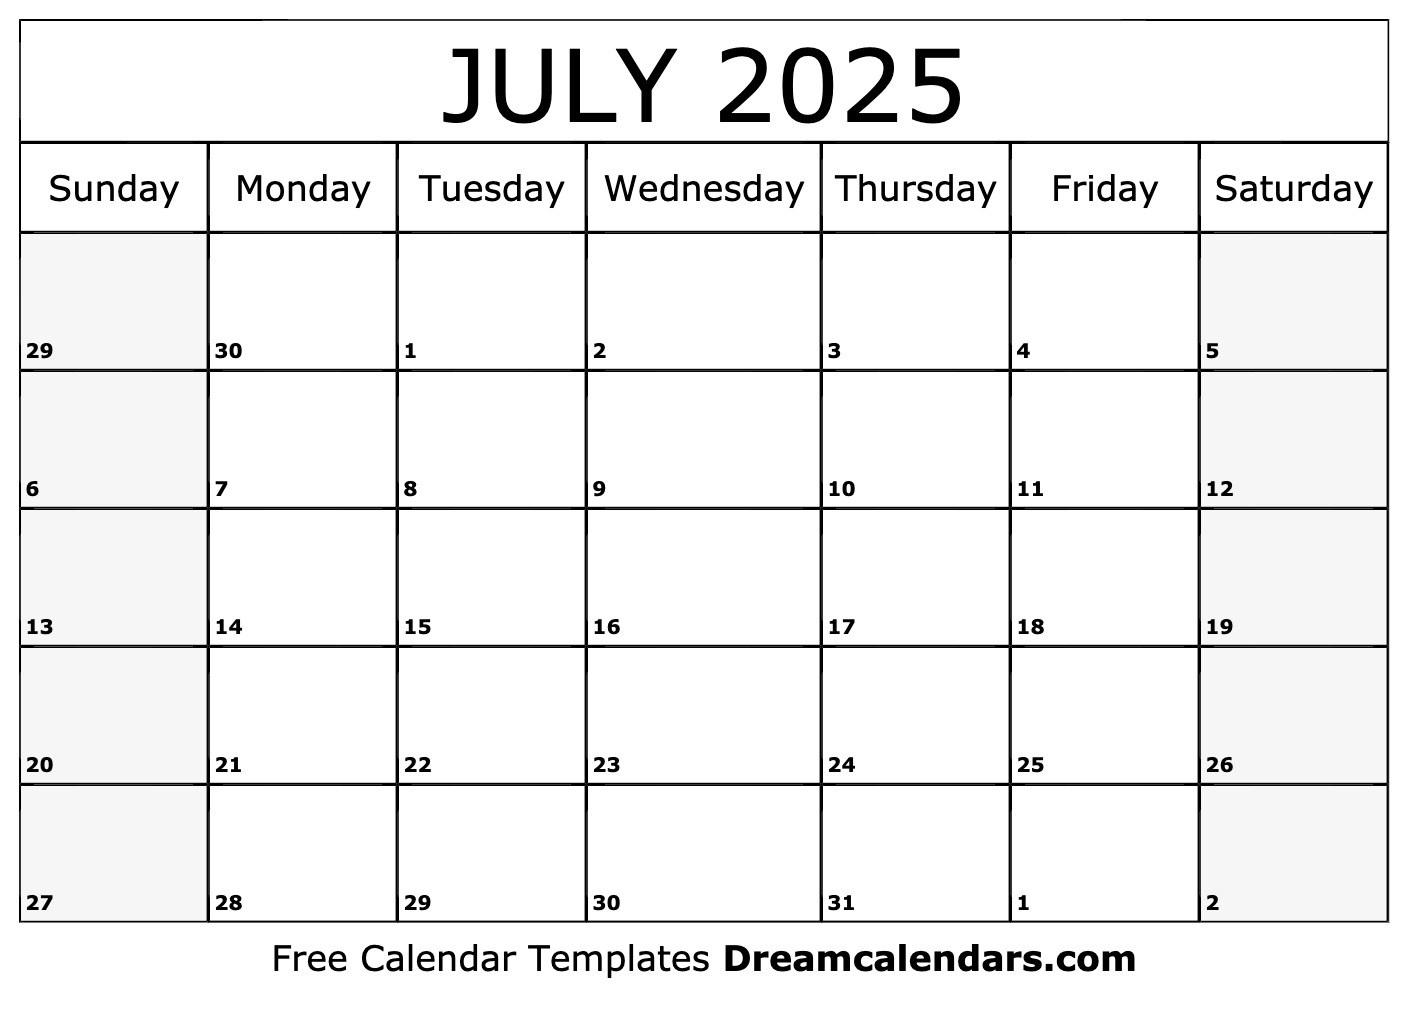 July 2025 Calendar - Free Printable with Holidays and Observances